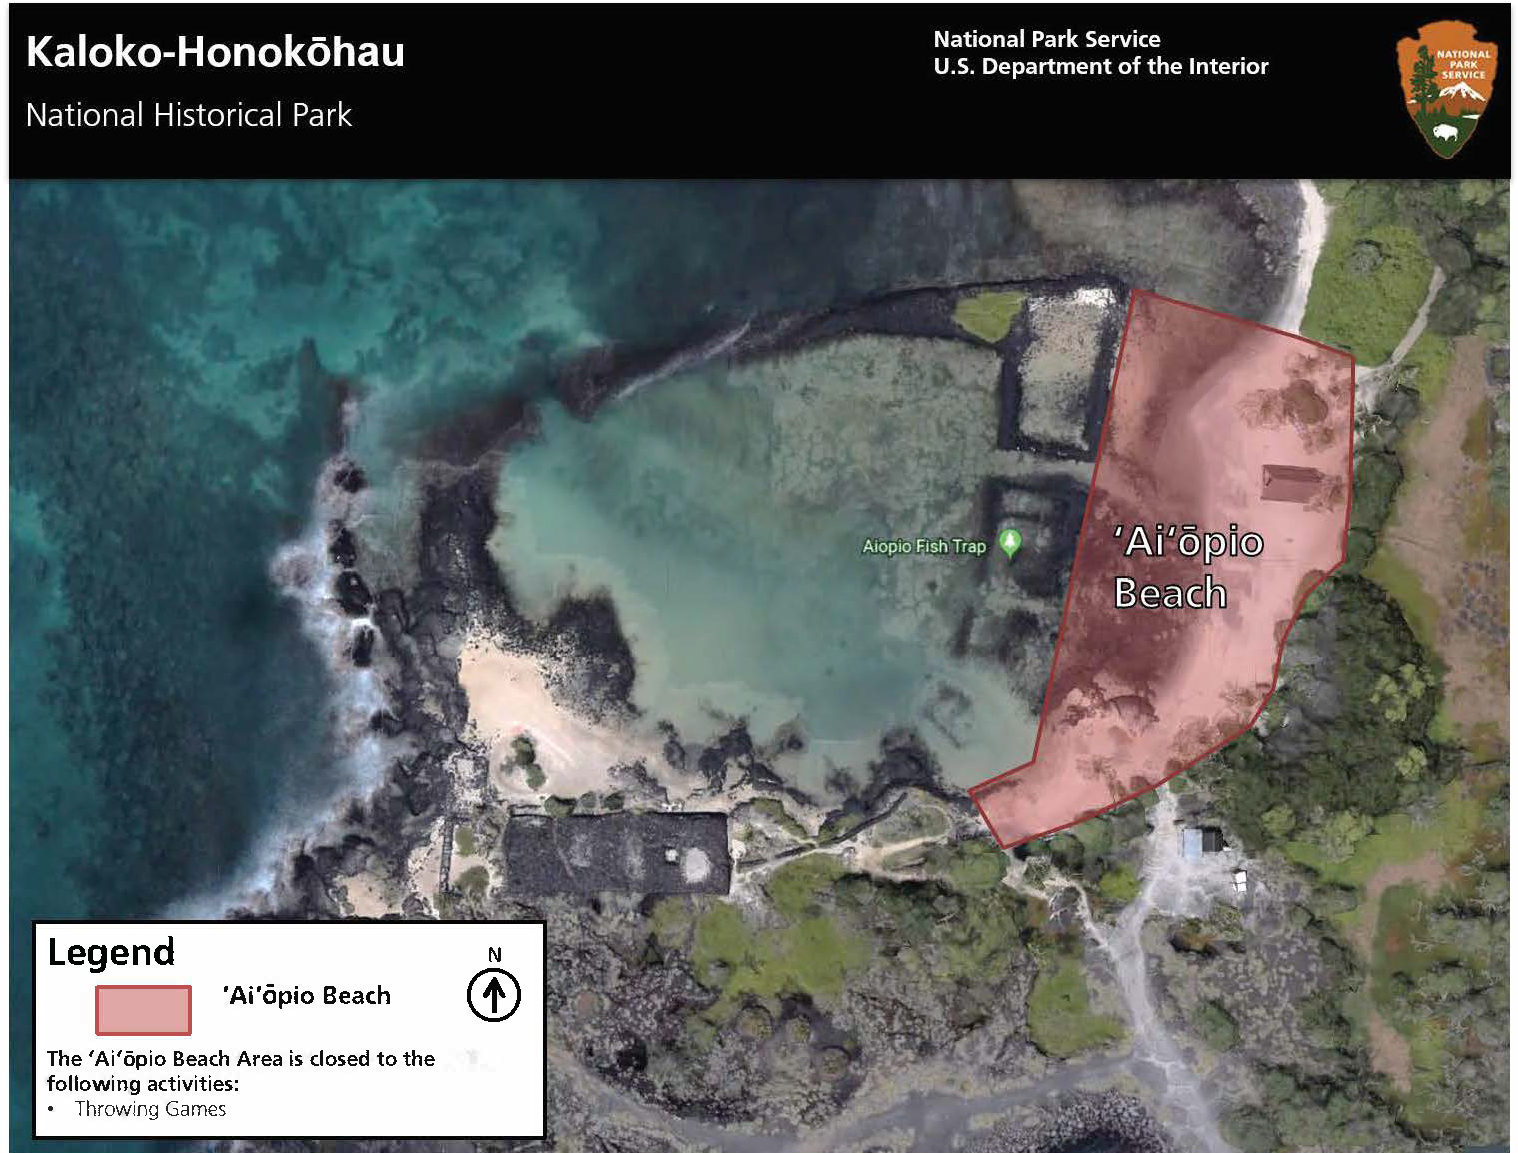 A map of the ʻAiʻōpio Beach Area with restrictions list. Full Alt text available below the image